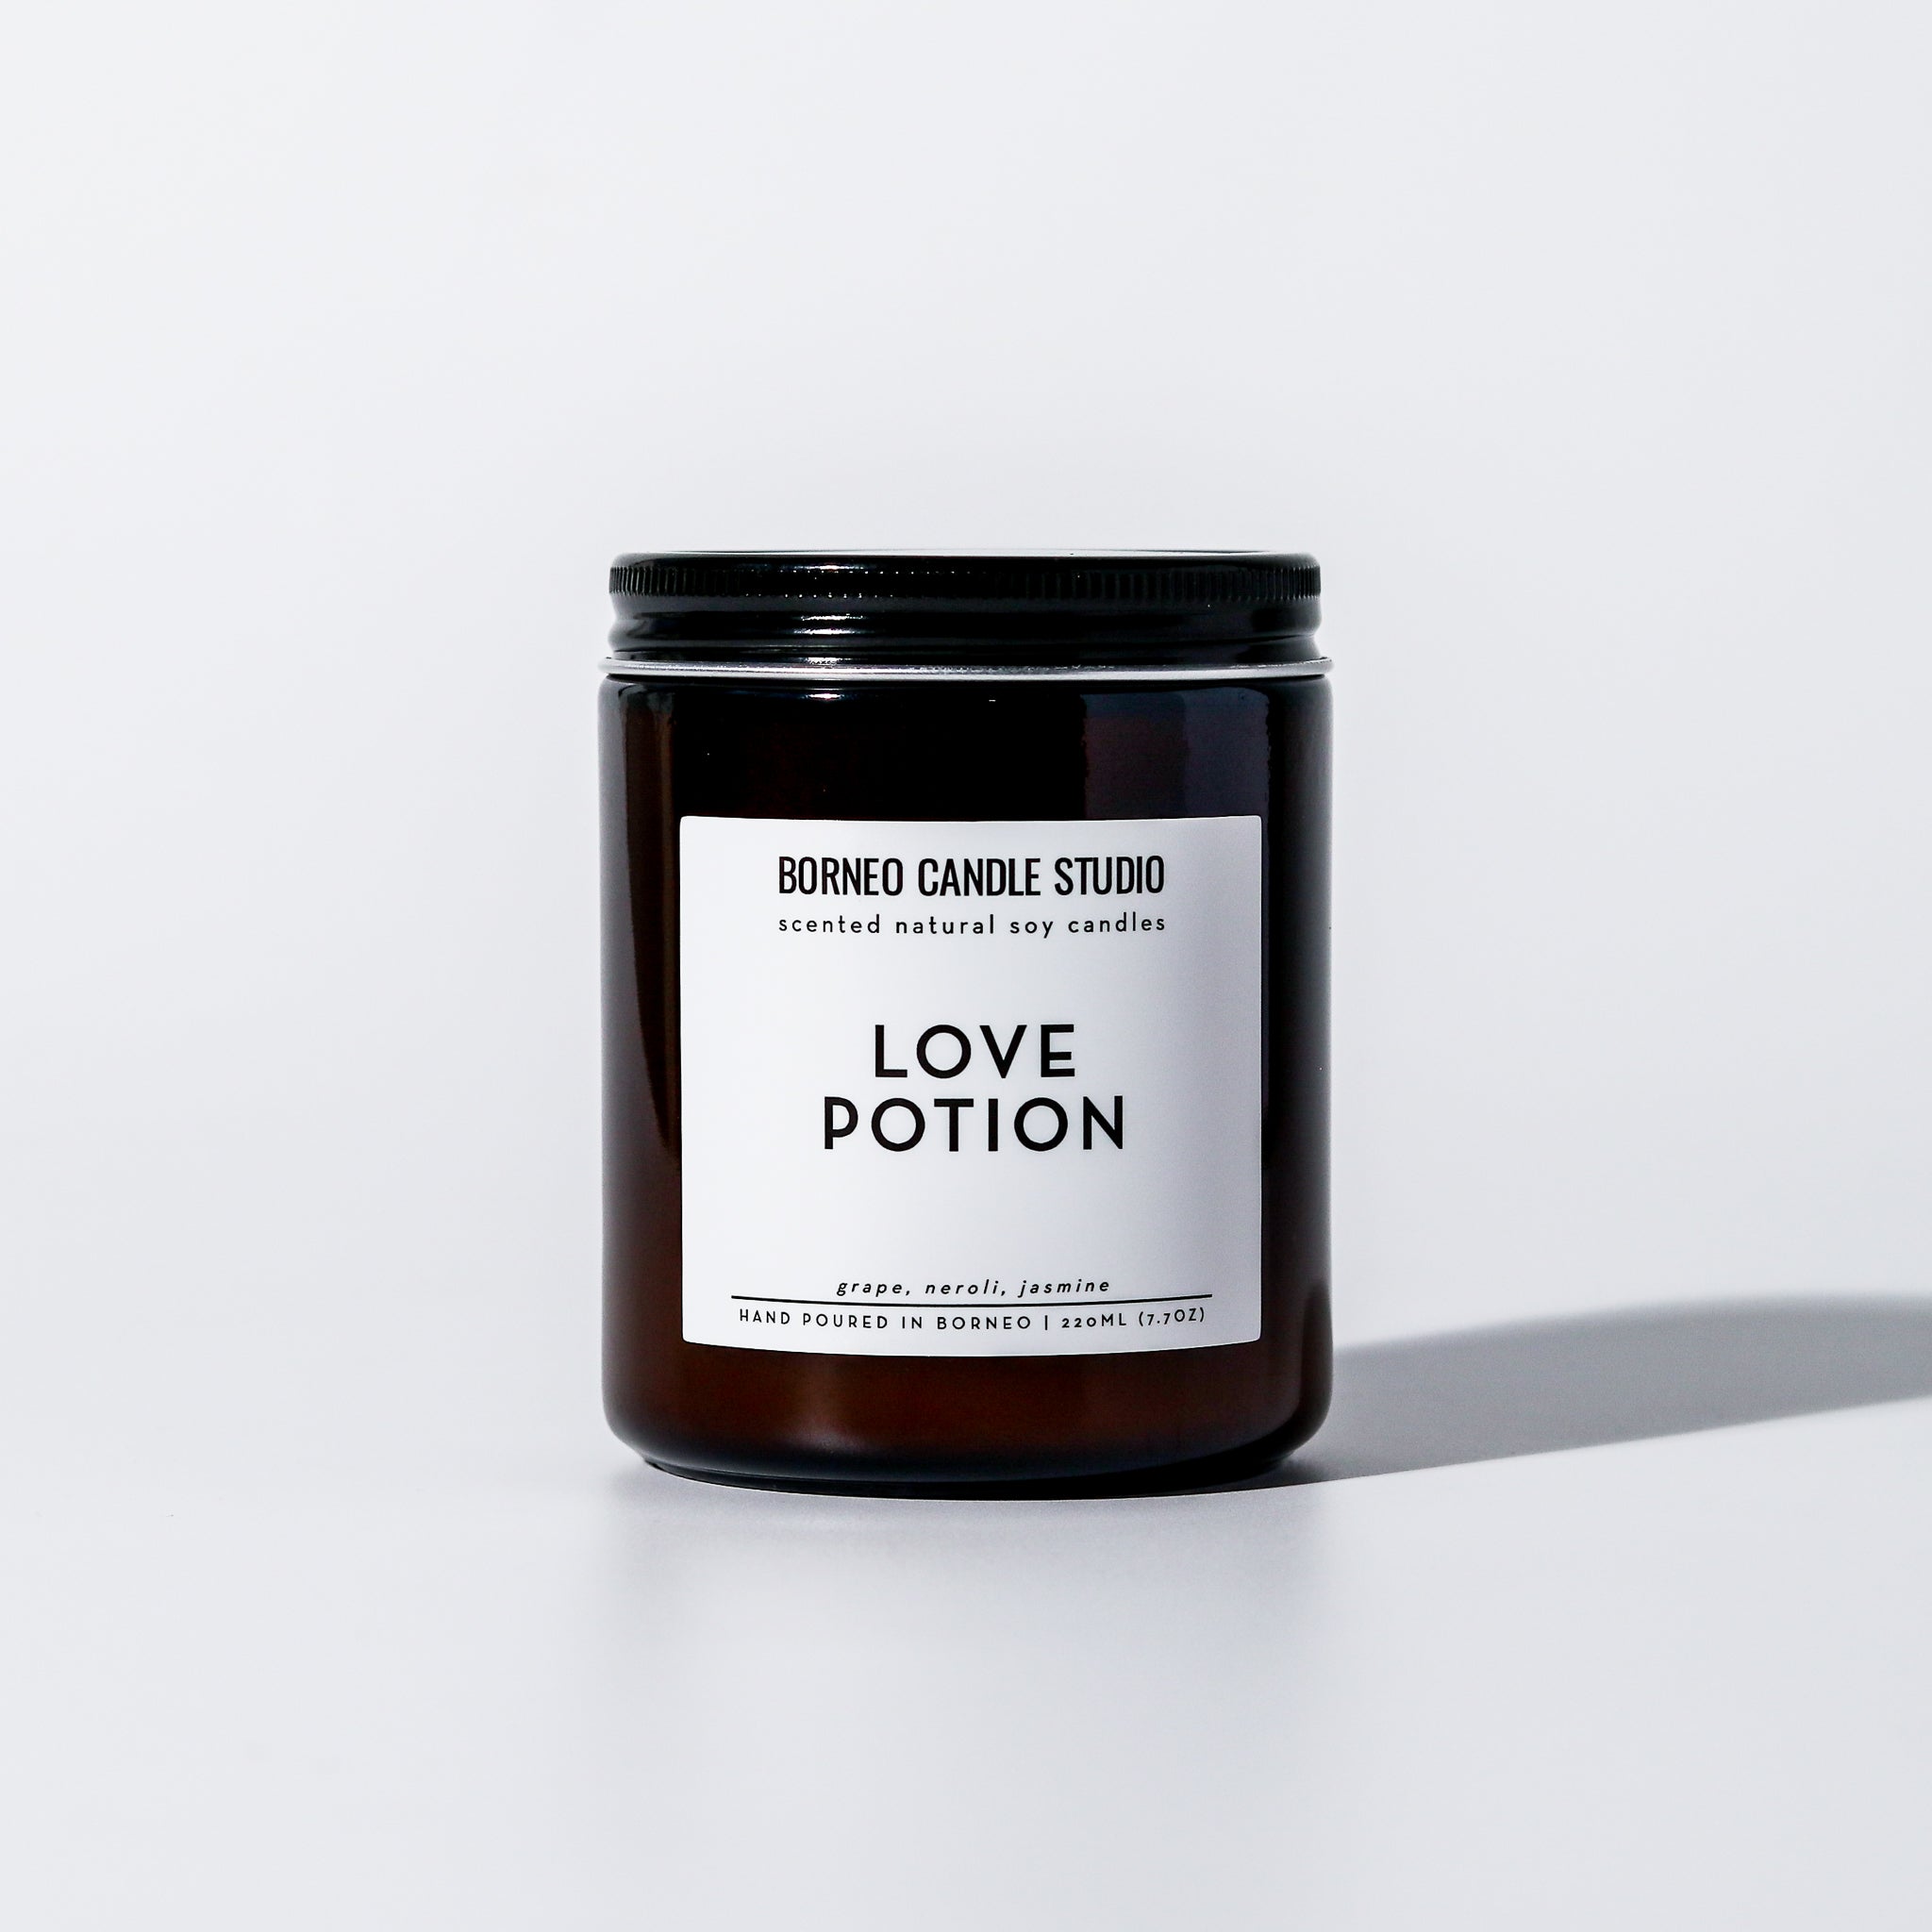 Love Potion Soy Candle - grape, neroli, jasmine scented candle in 7.7 oz amber glass jar